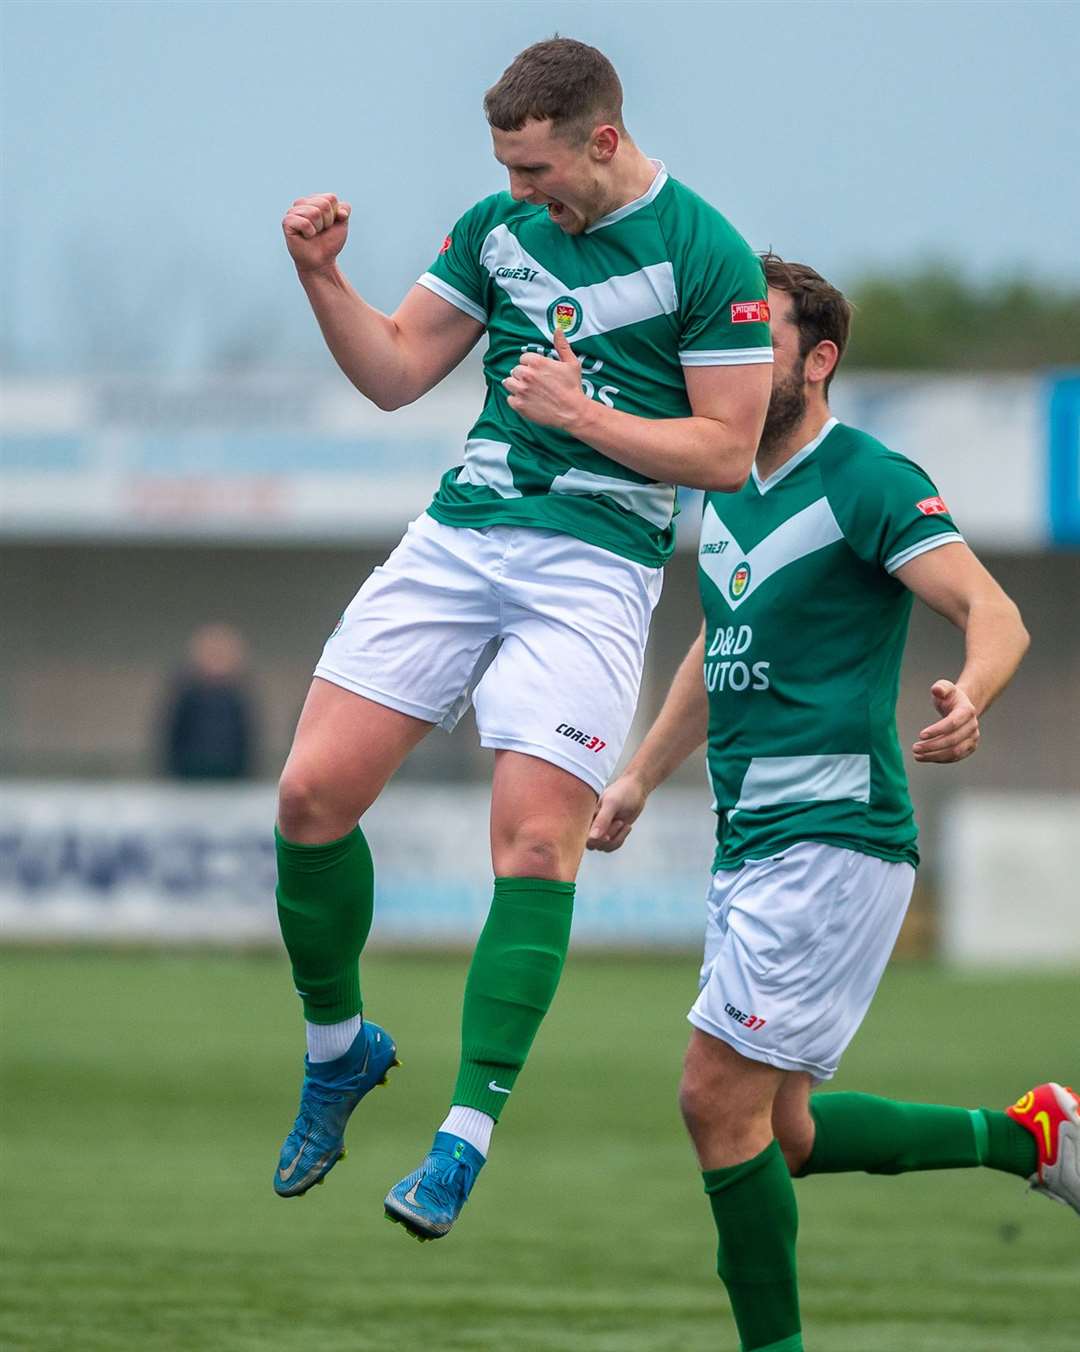 It all started so well for Ashford after Josh Wisson's opener Picture: Ian Scammell